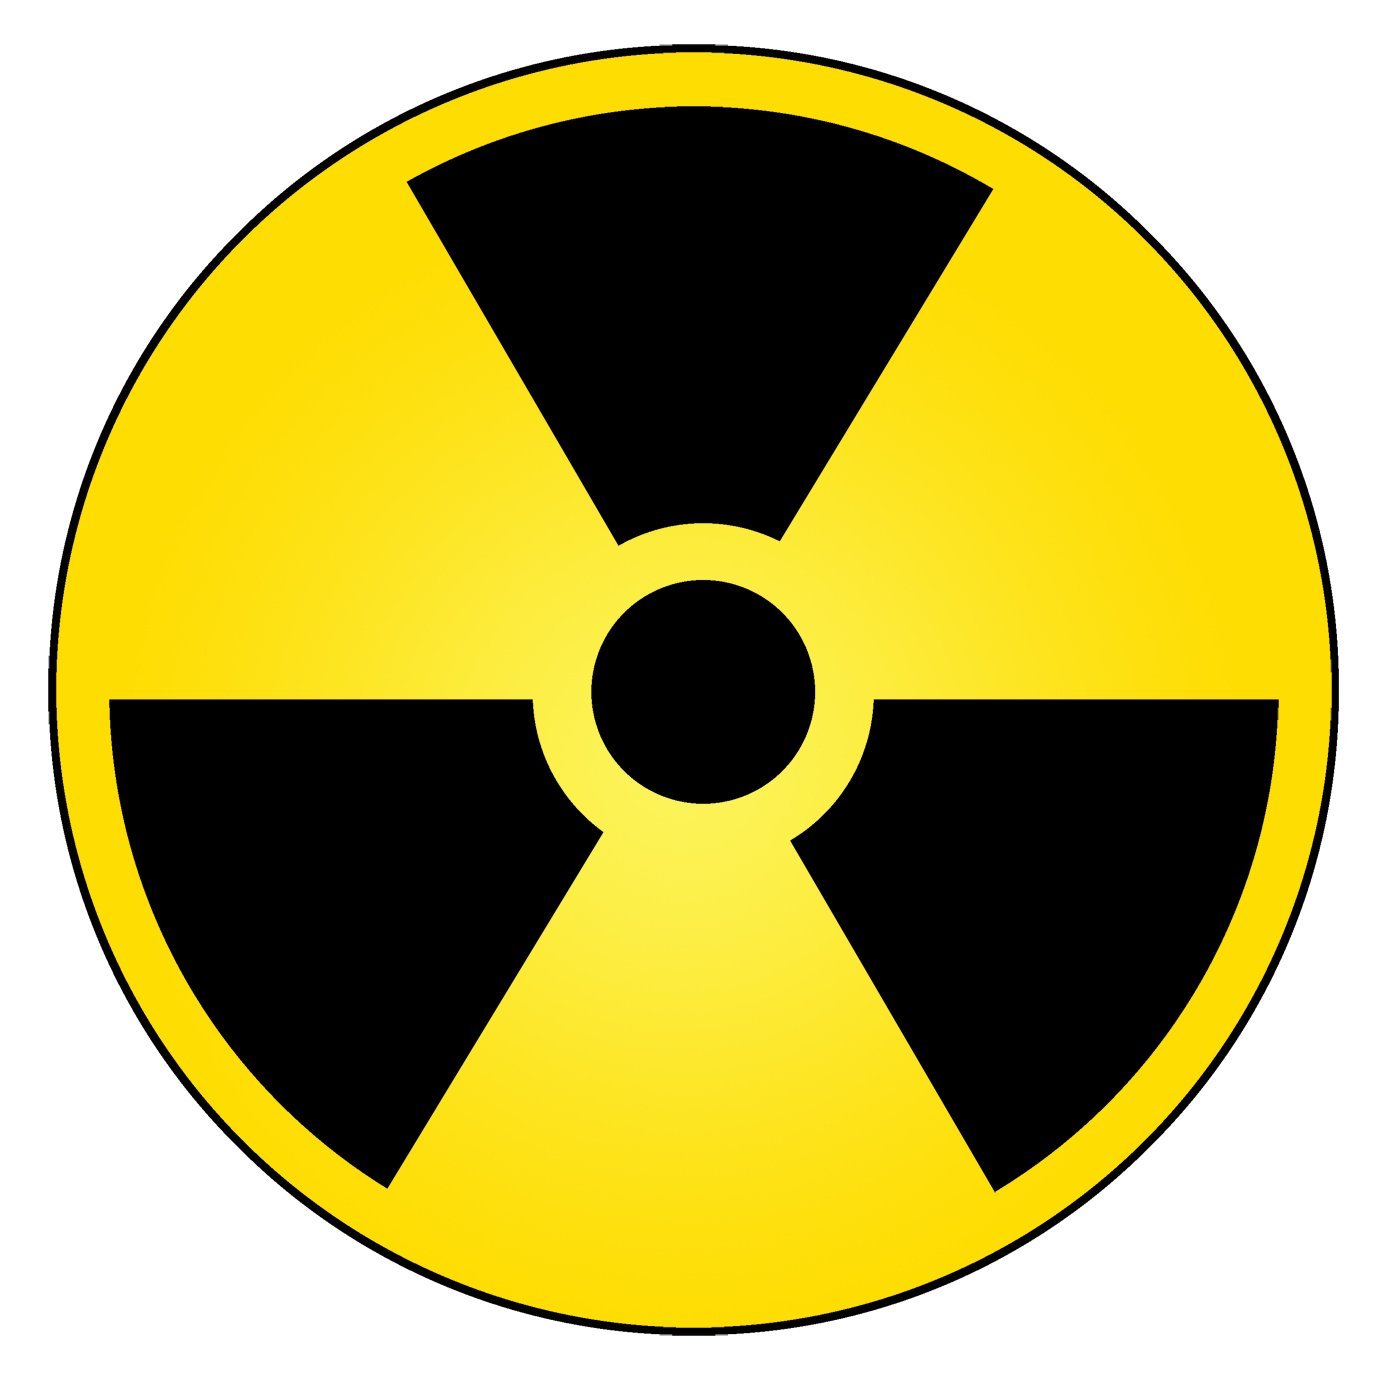 11 Radioactive Warning Sign Free Cliparts That You Can Download To You